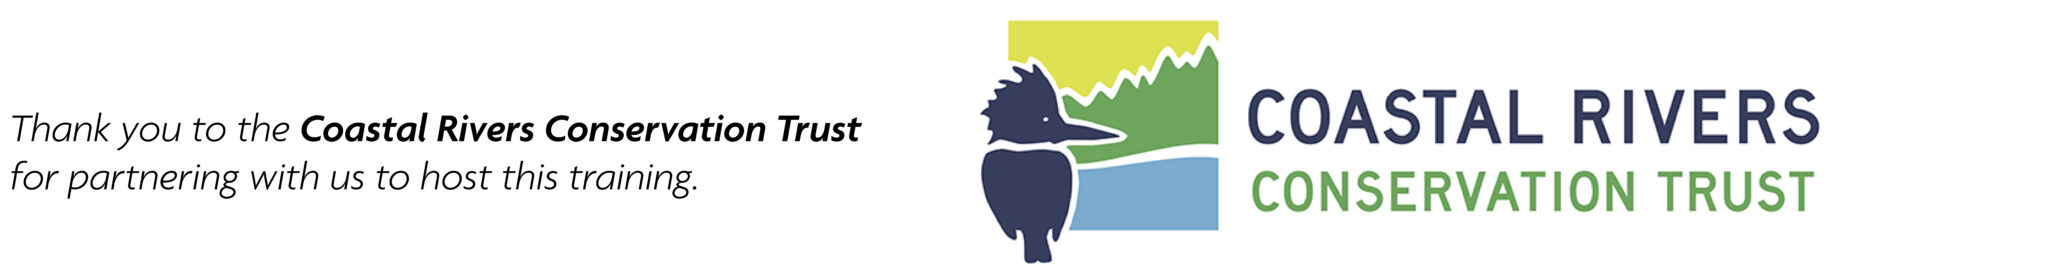 Coastal Rivers Conservation Trust logo at the right (graphic design with bird, trees, and ocean), and text at the left that reads, 'Thank you to the Coastal Rivers Conservation Trust for partnering with us to host this training.'